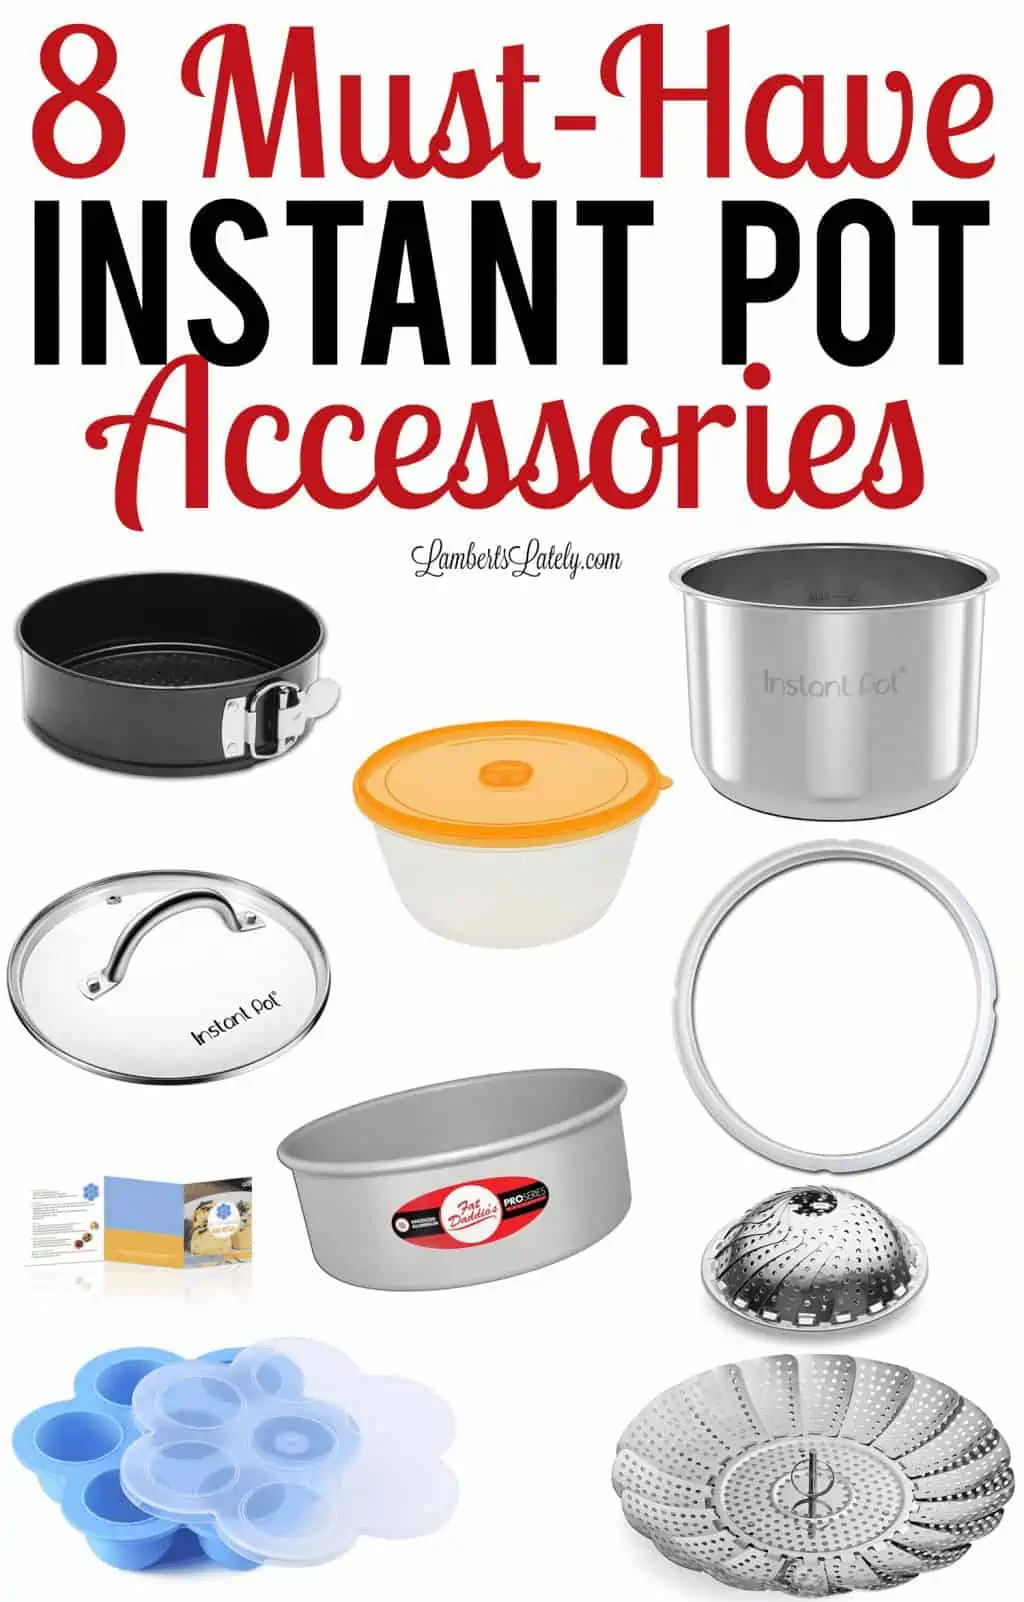 8 must have instant pot accessories.